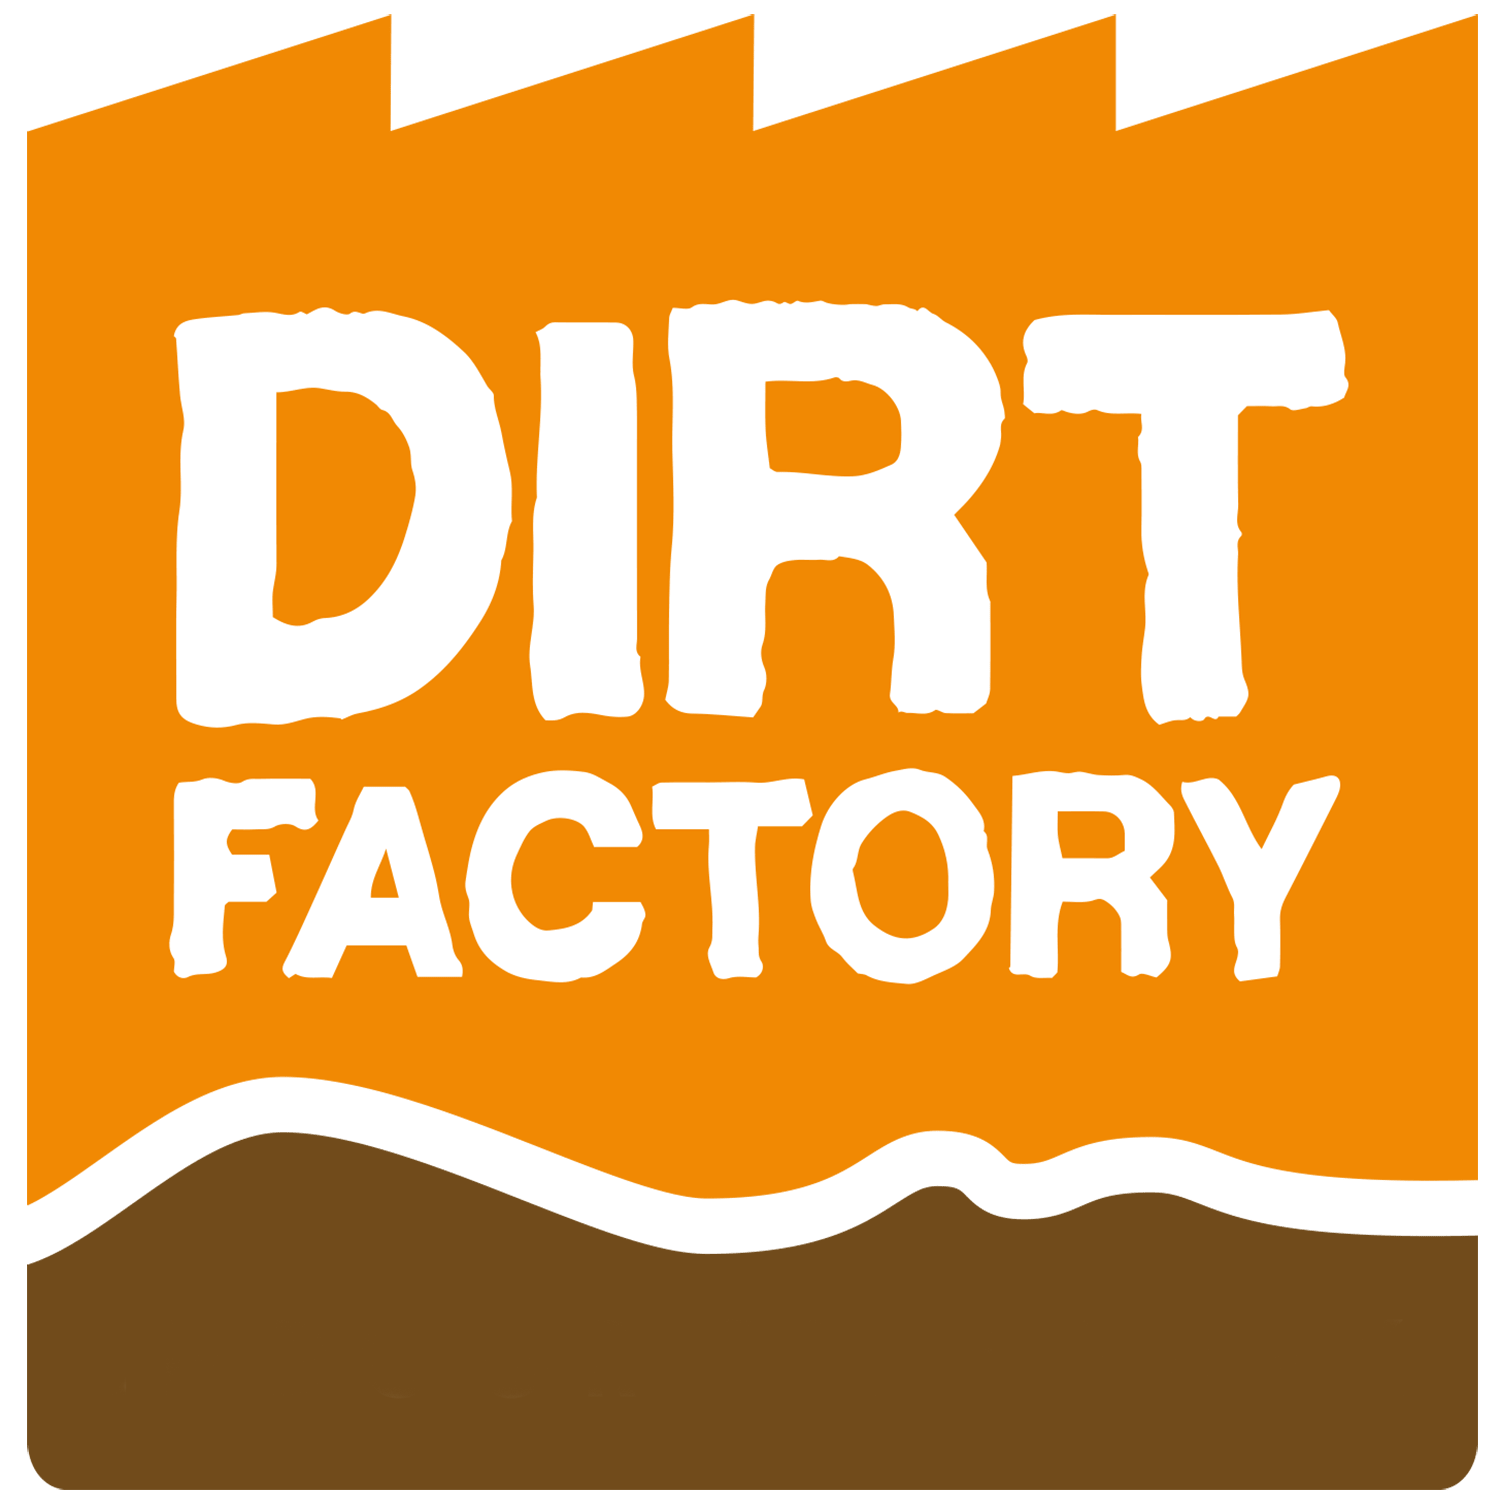 Dirt Factory | Airbag hire | Pump track hire | Coaching | Trail design ...